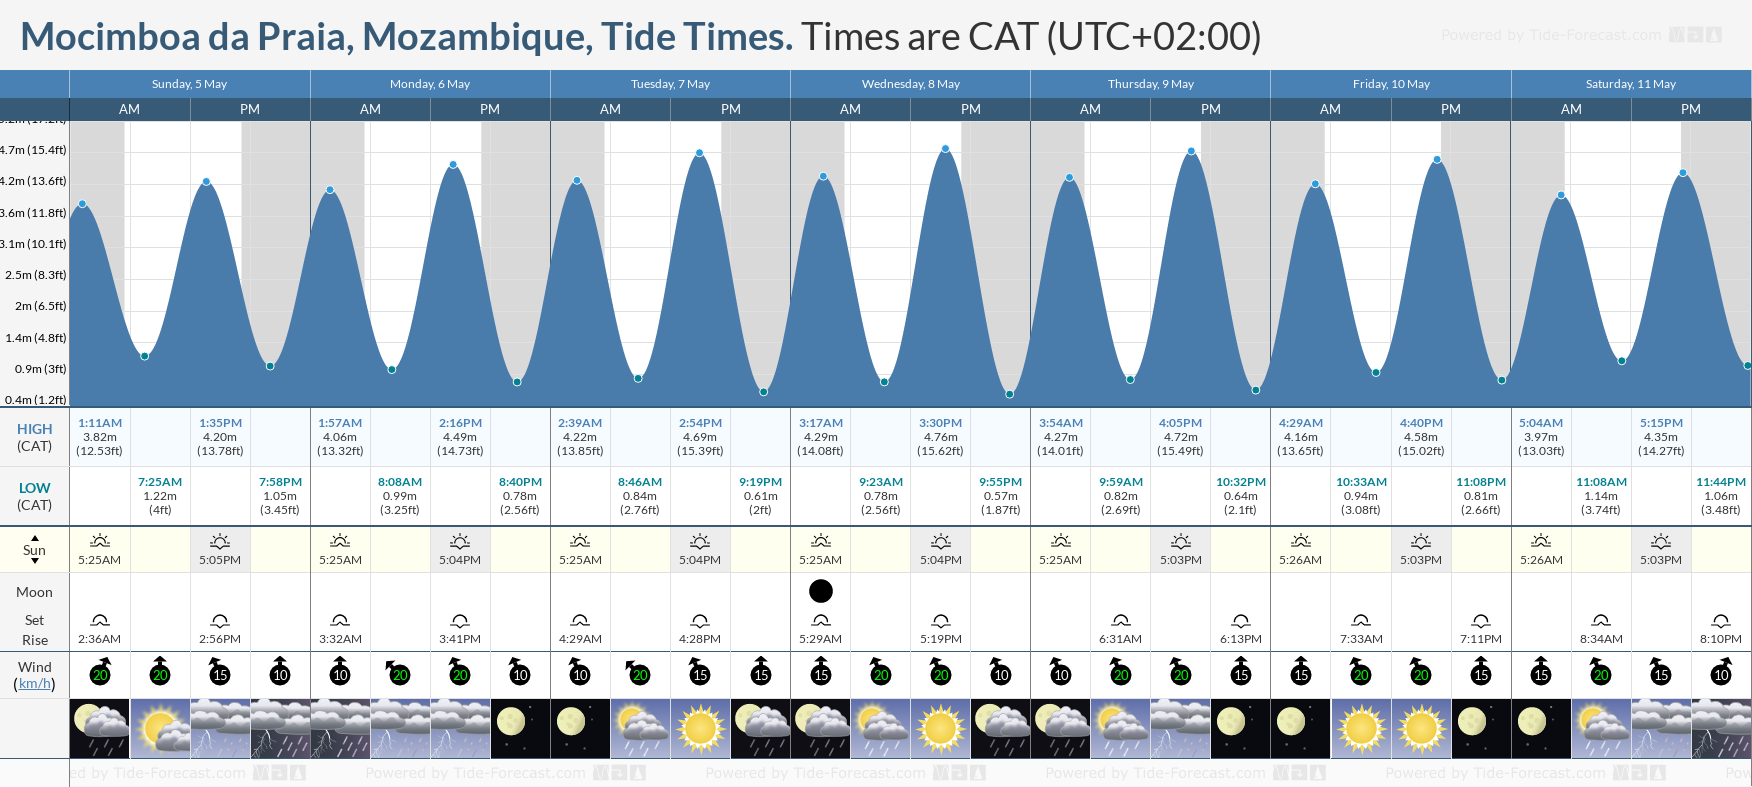 Mocimboa da Praia, Mozambique Tide Chart including high and low tide tide times for the next 7 days